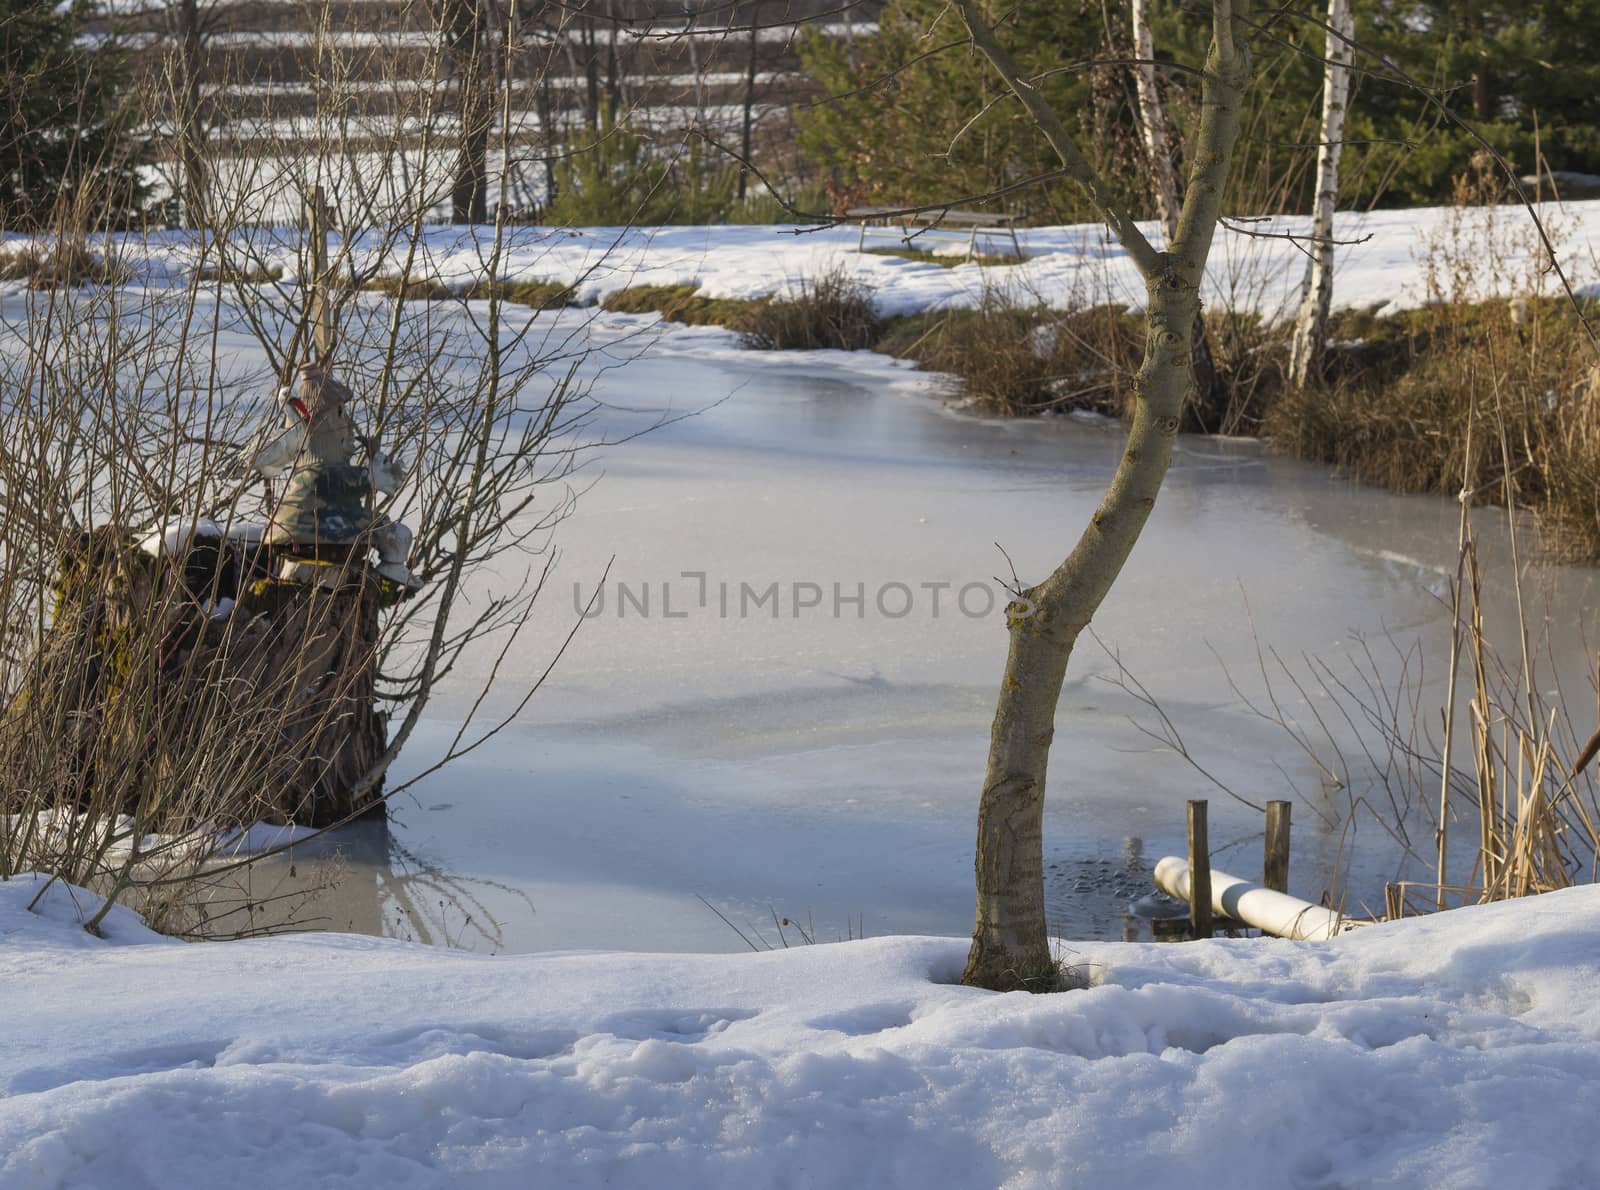 frozen pond with trees snow and water sprite figurine in sunlight